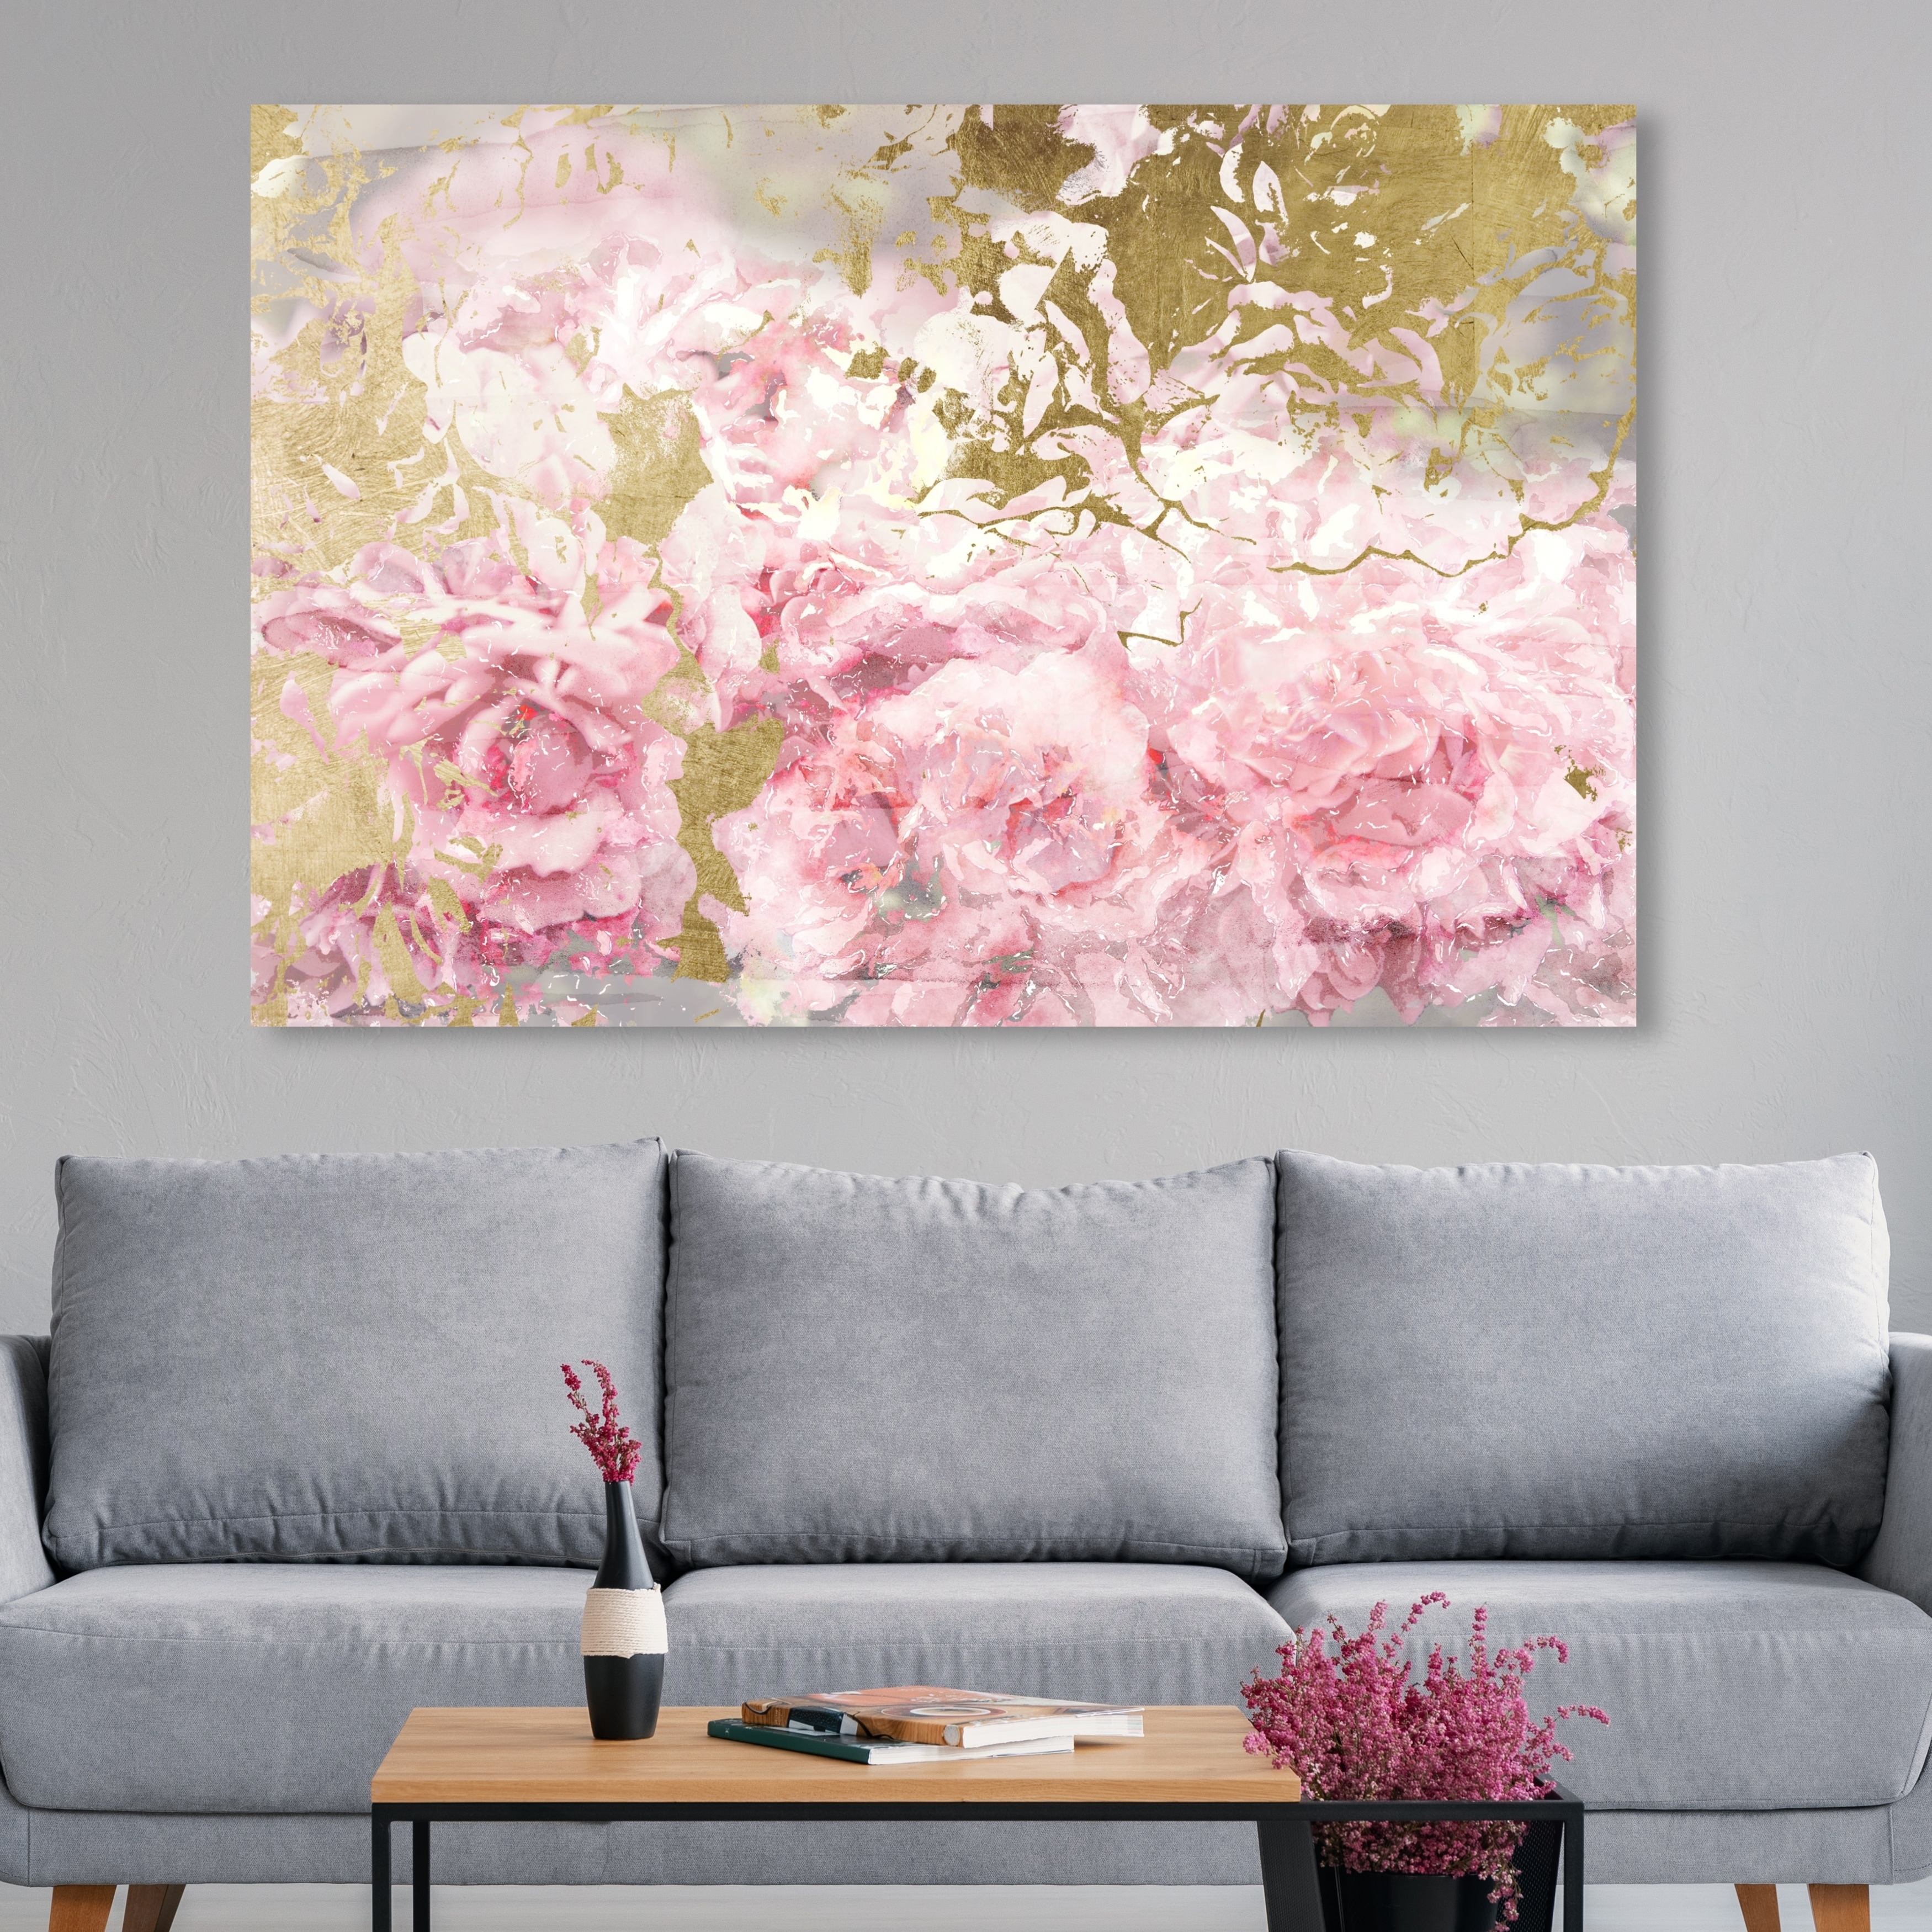 Canvas Wall Art For Every Budget - At Home - Art On Canvas